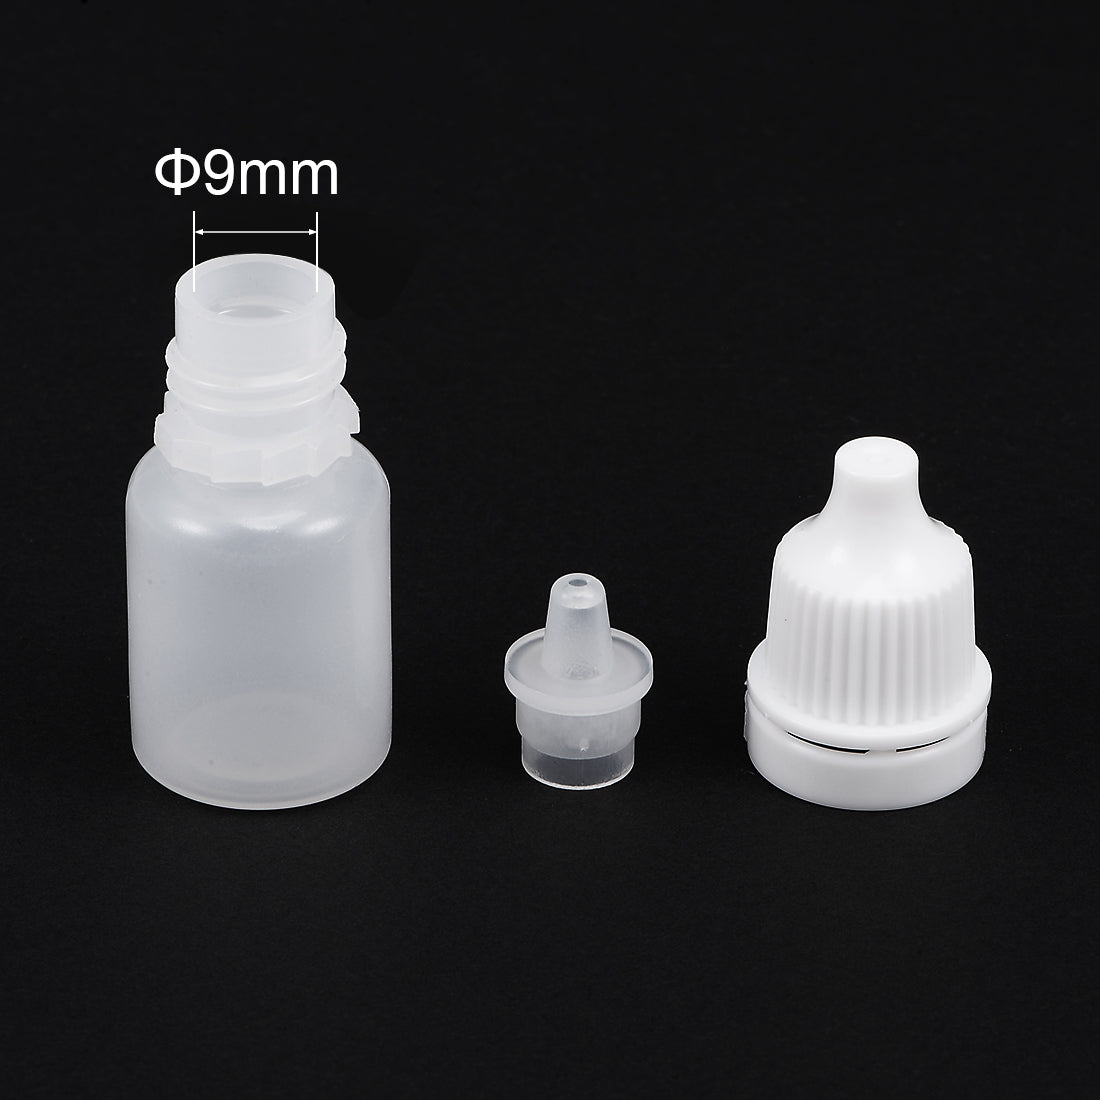 uxcell Uxcell 5ml/0.17 oz Empty Squeezable Dropper Bottle 15pcs